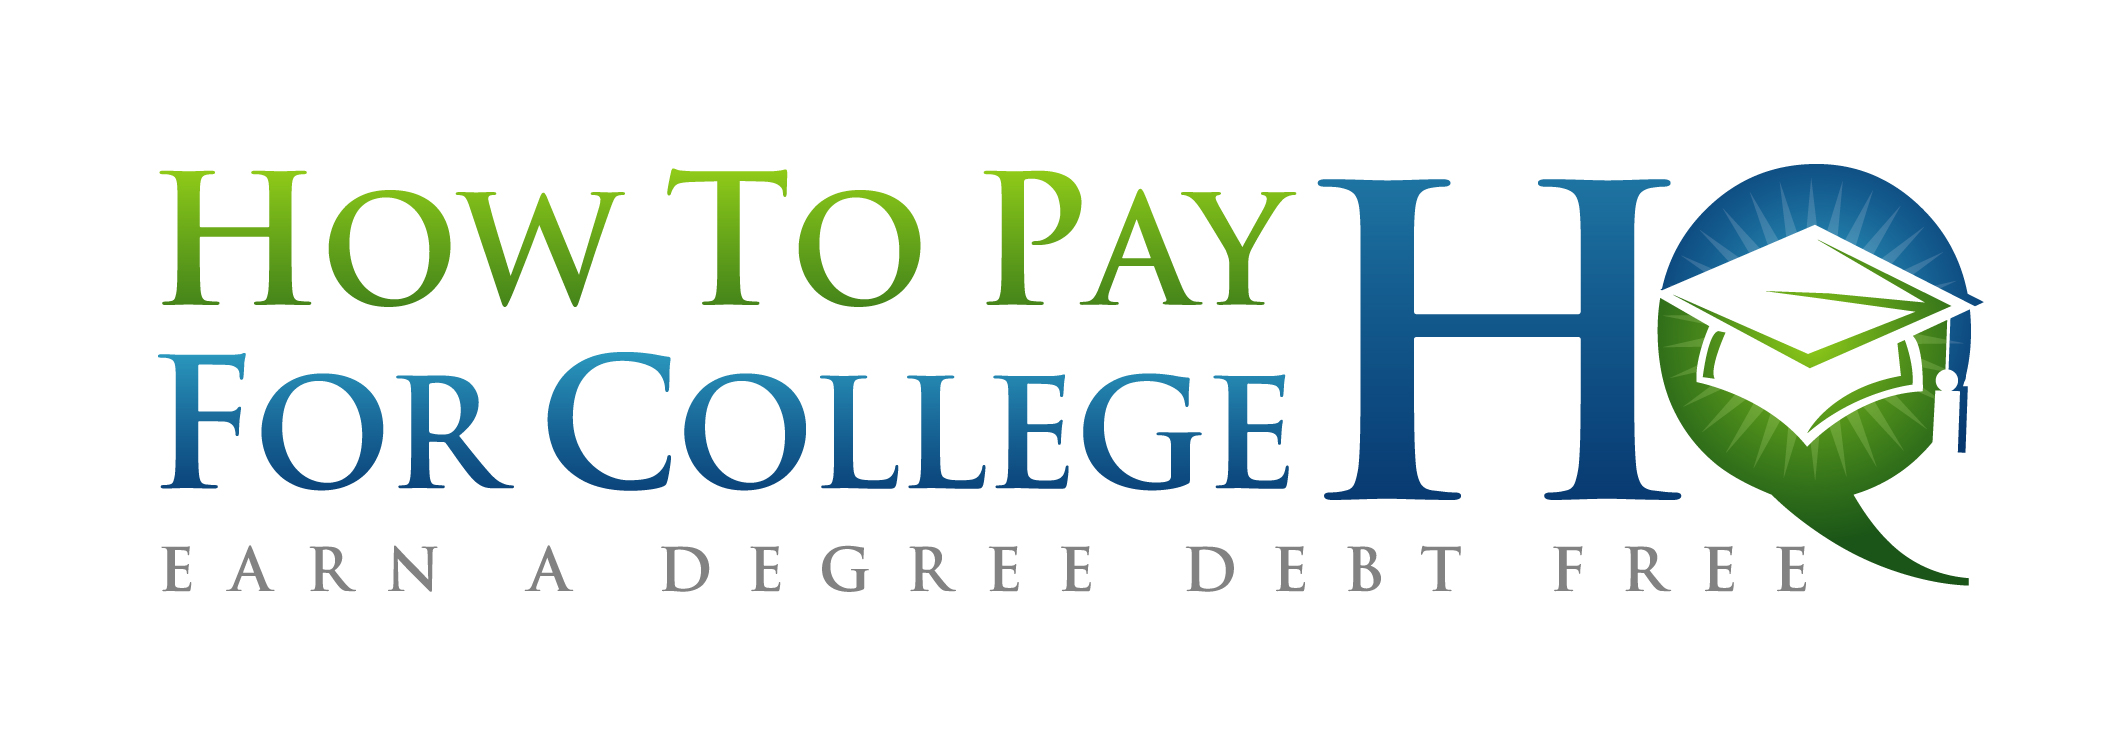 How to Pay for College Podcast